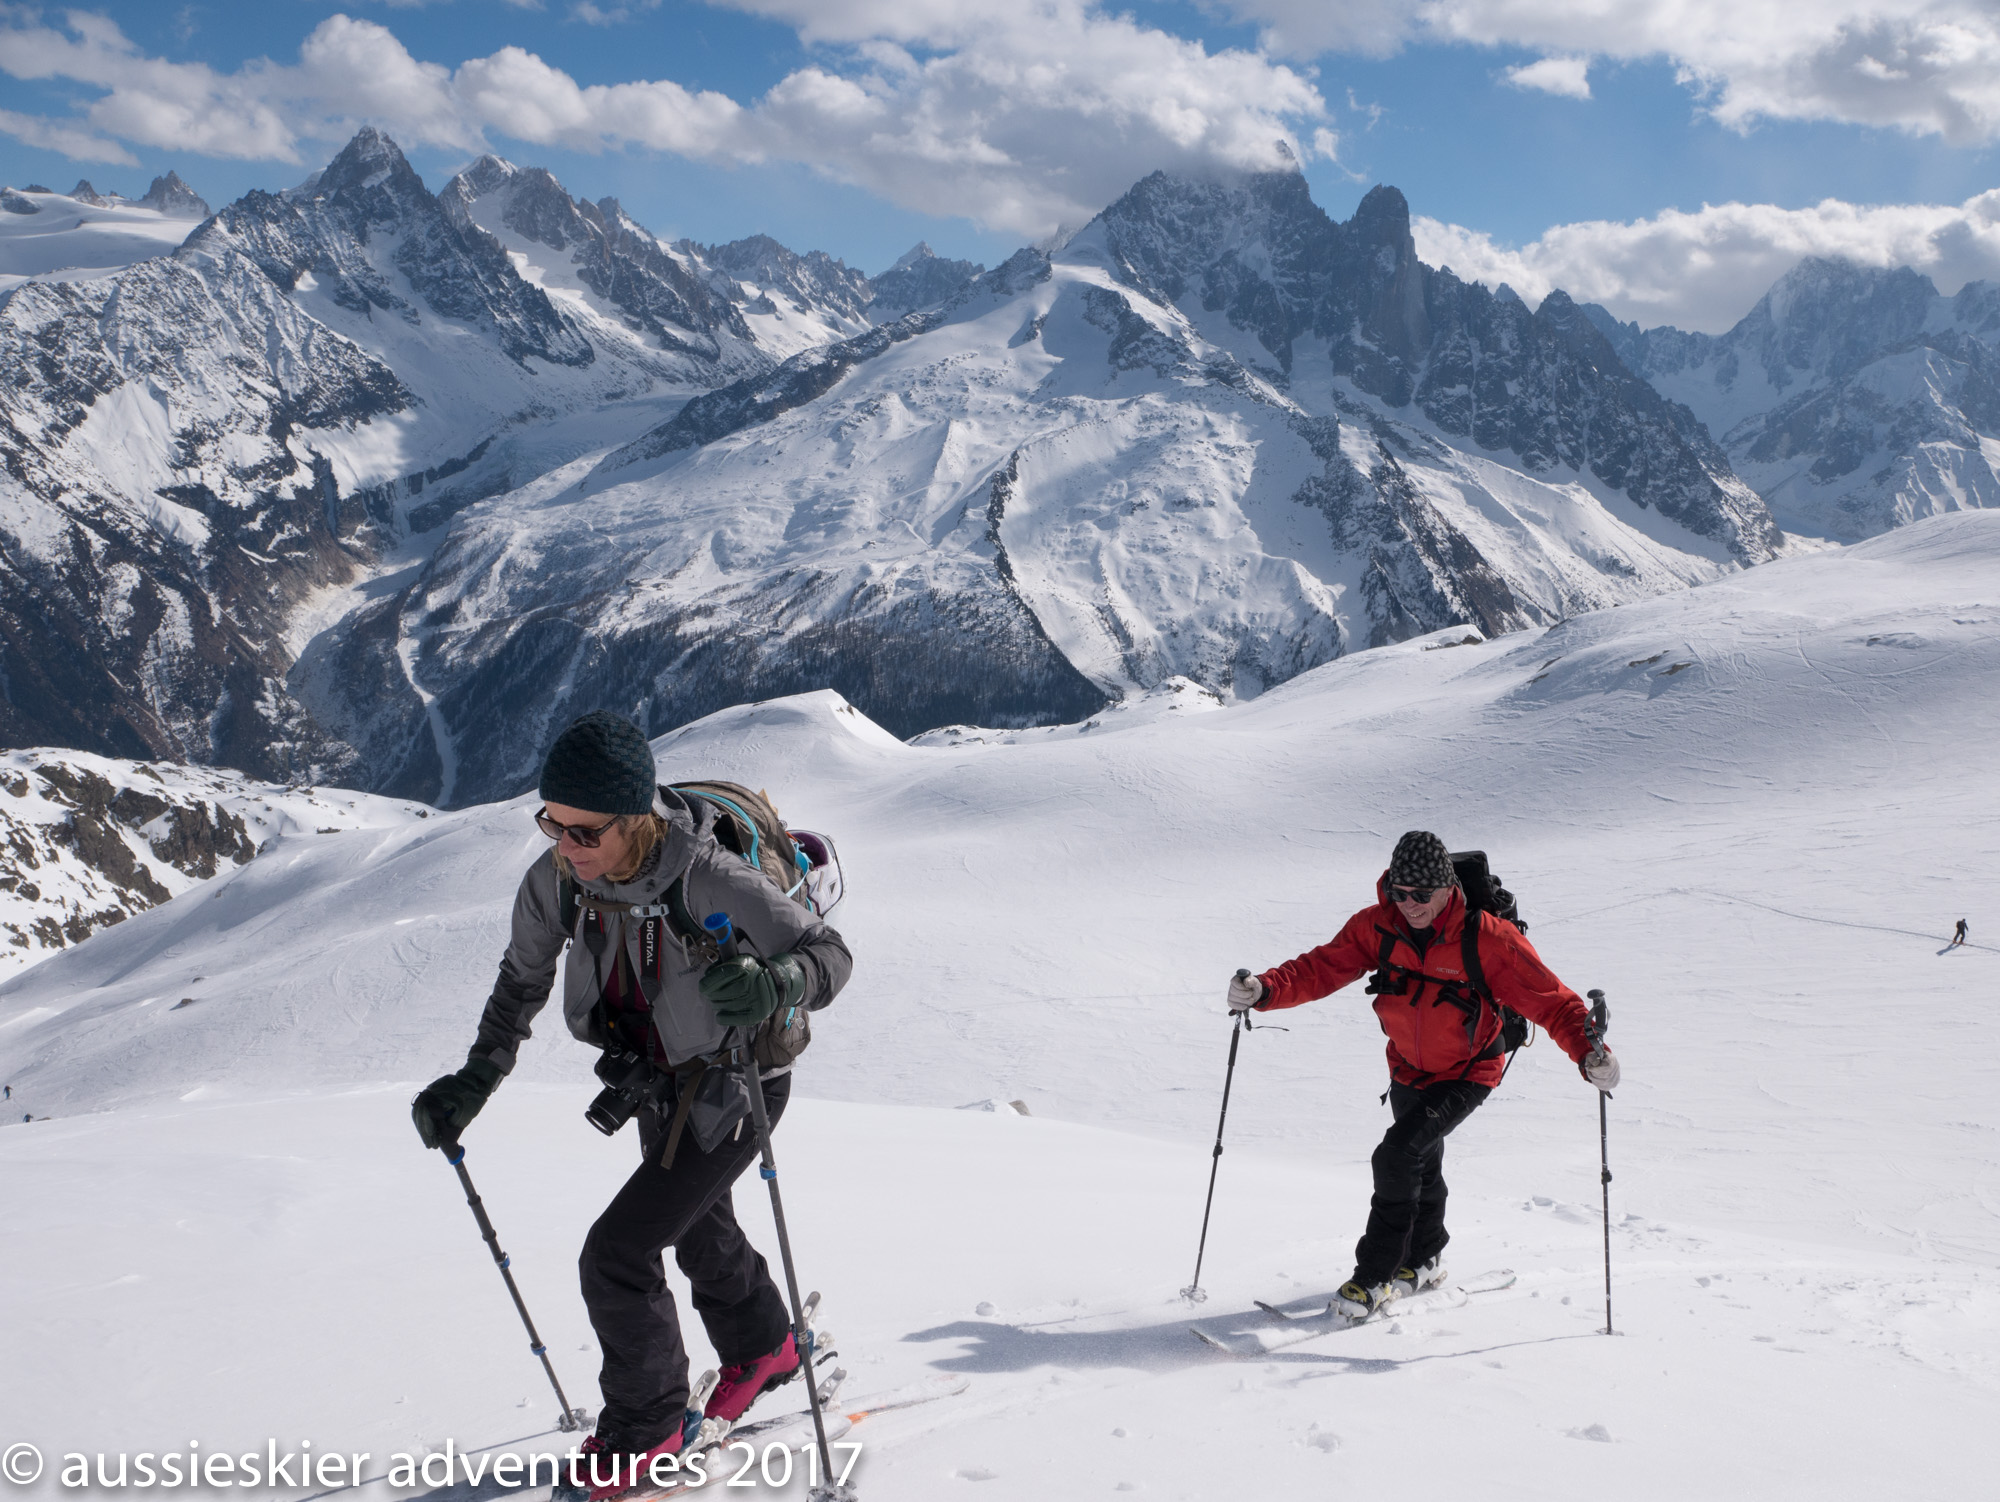 Chamonix 2017 - Ski Touring in the Aiguilles Rouges